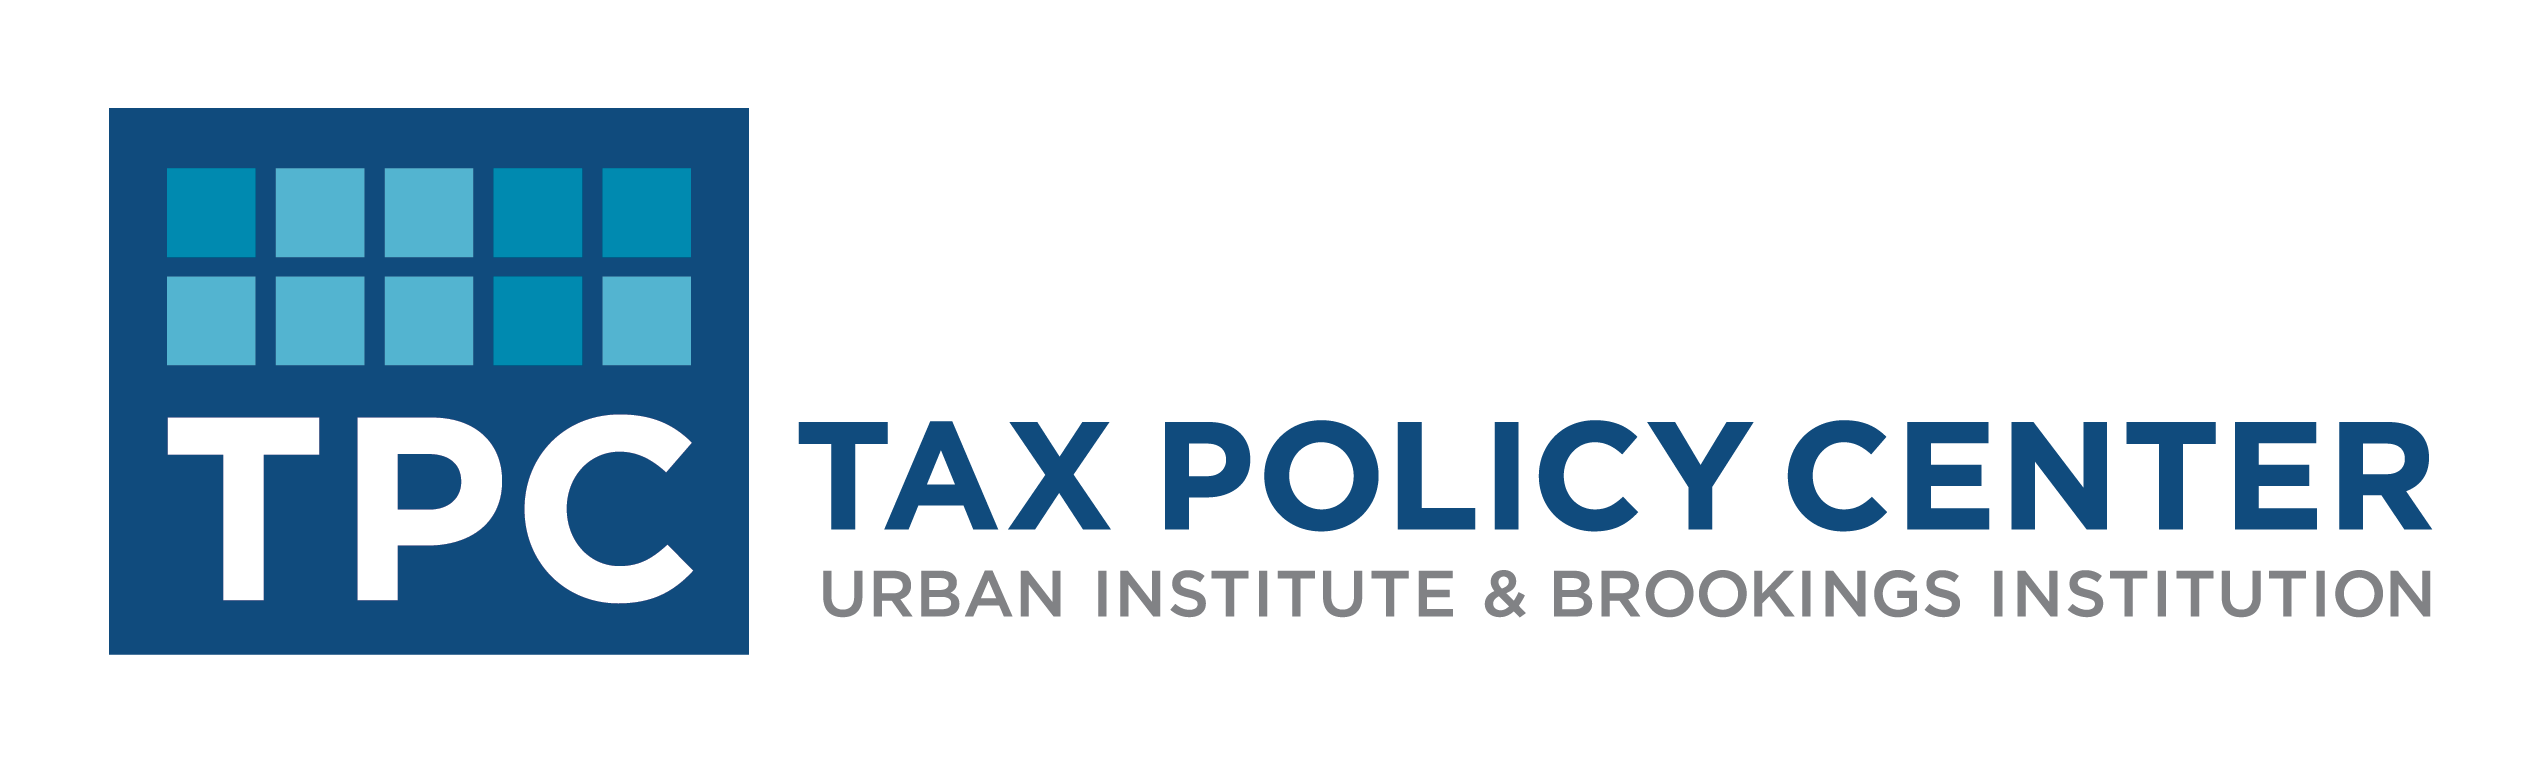 Tax Policcy Center Logo for Site